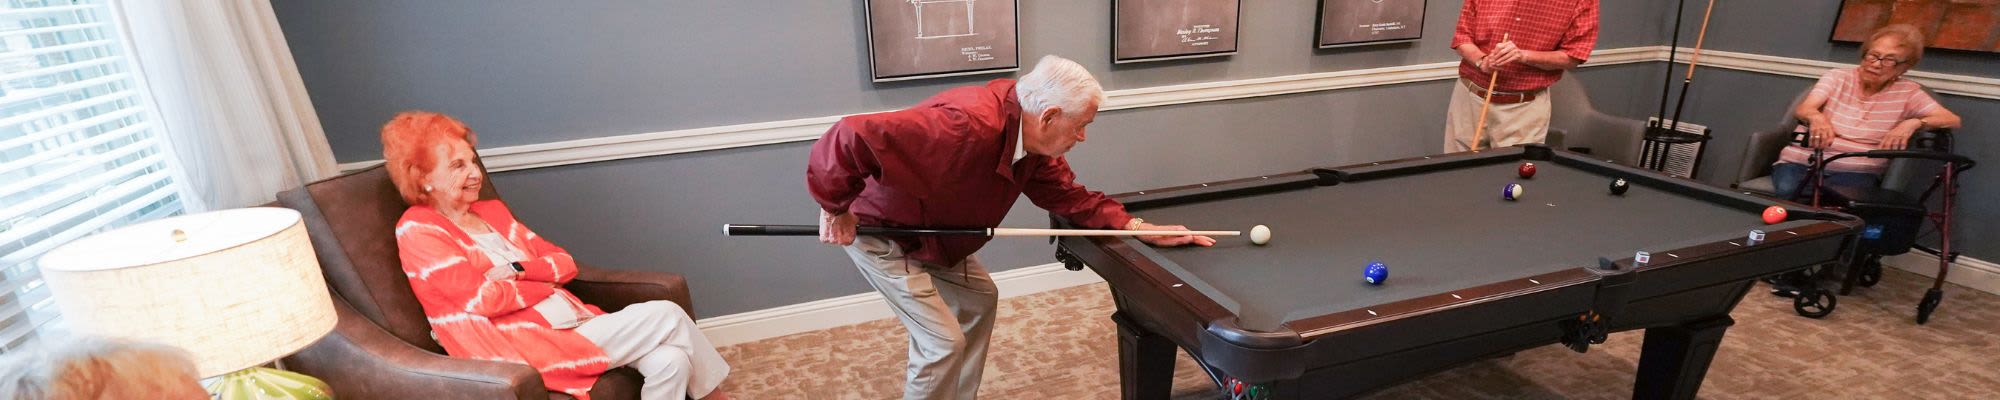 Activities & Events at The Harmony Collection at Roanoke - Memory Care in Roanoke, Virginia